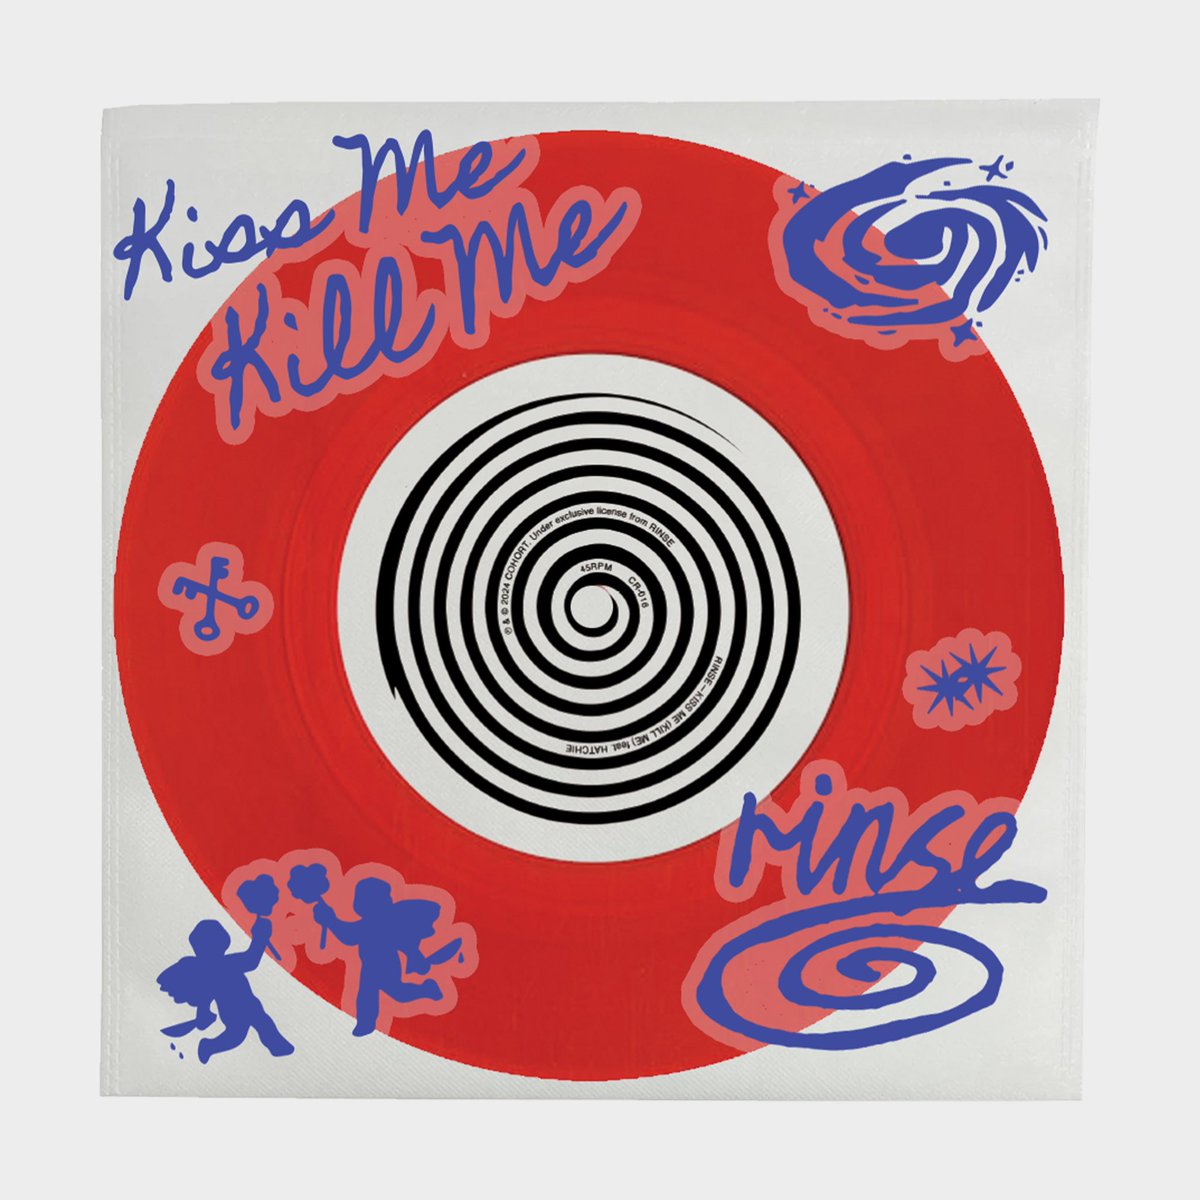 Limited edition 7” & sticker sheet featuring ‘Kiss Me (Kill Me)’ ft. @hihatchie & upcoming single ‘Breathe’ out May 24th! Pre-order now linkr.ee/rinseband